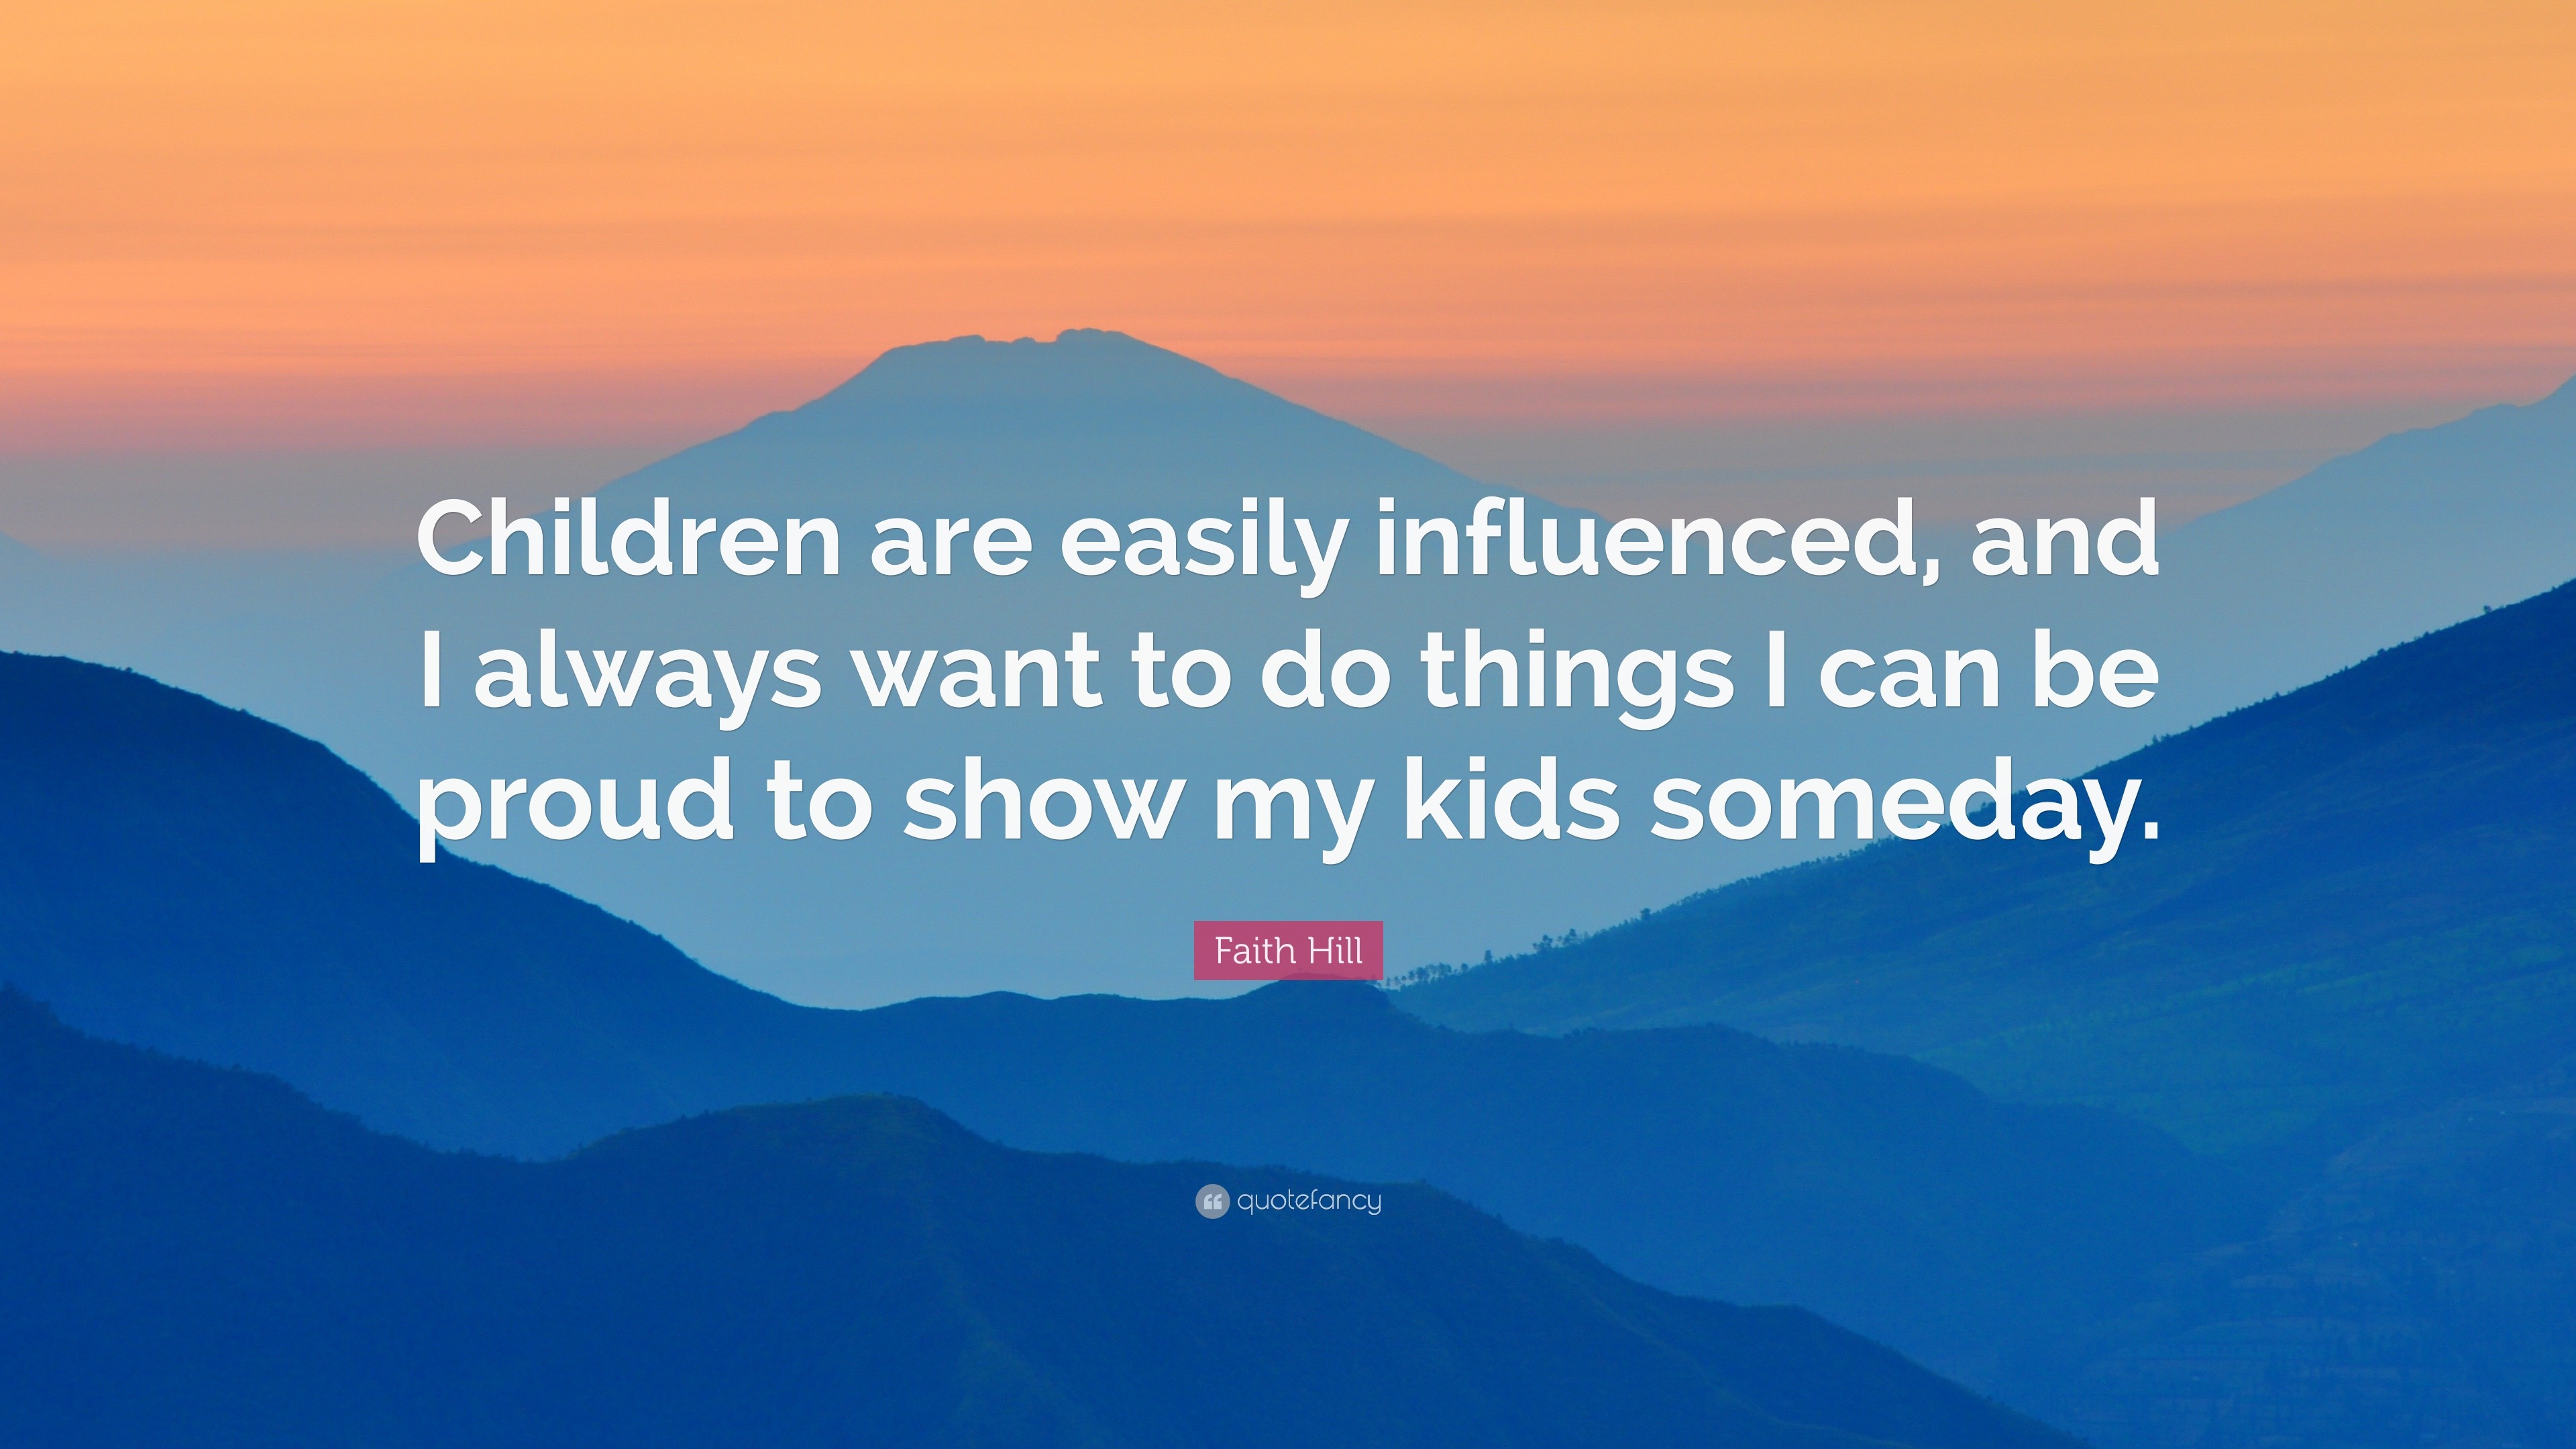 Faith Hill Quote: “Children are easily influenced, and I always want to ...